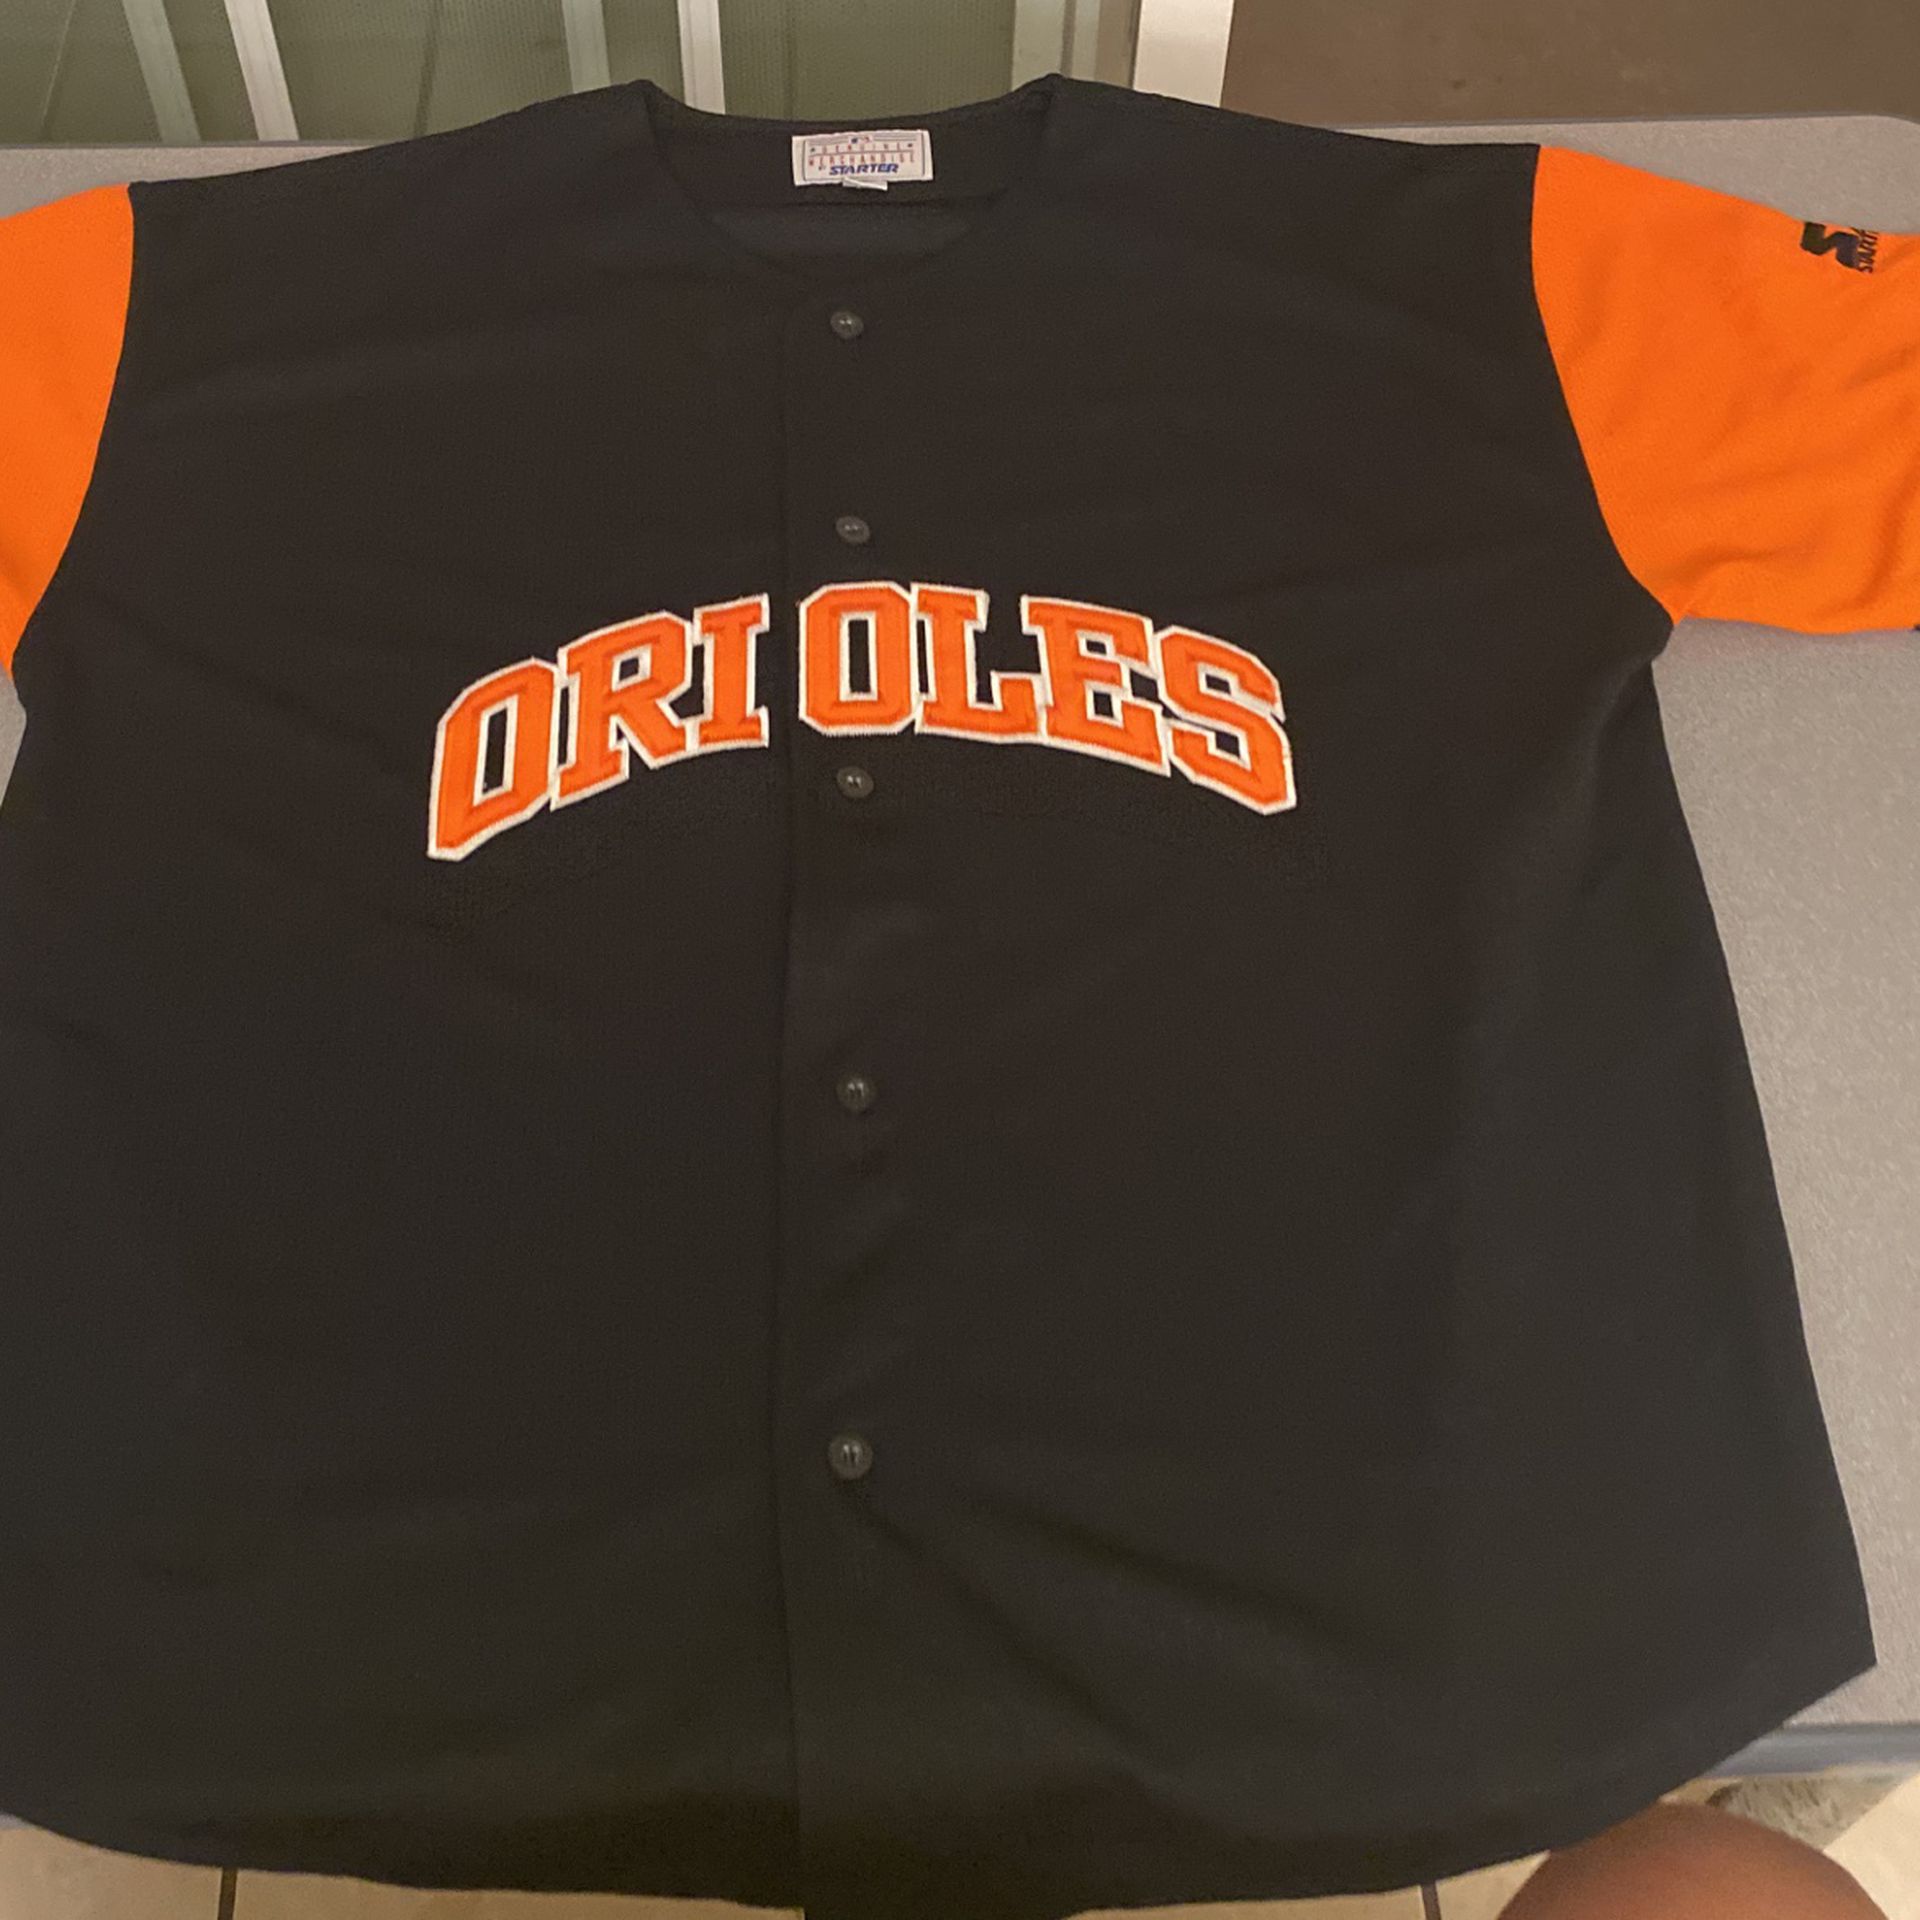 Vintage 1980's Baltimore Orioles jersey for Sale in San Diego, CA - OfferUp